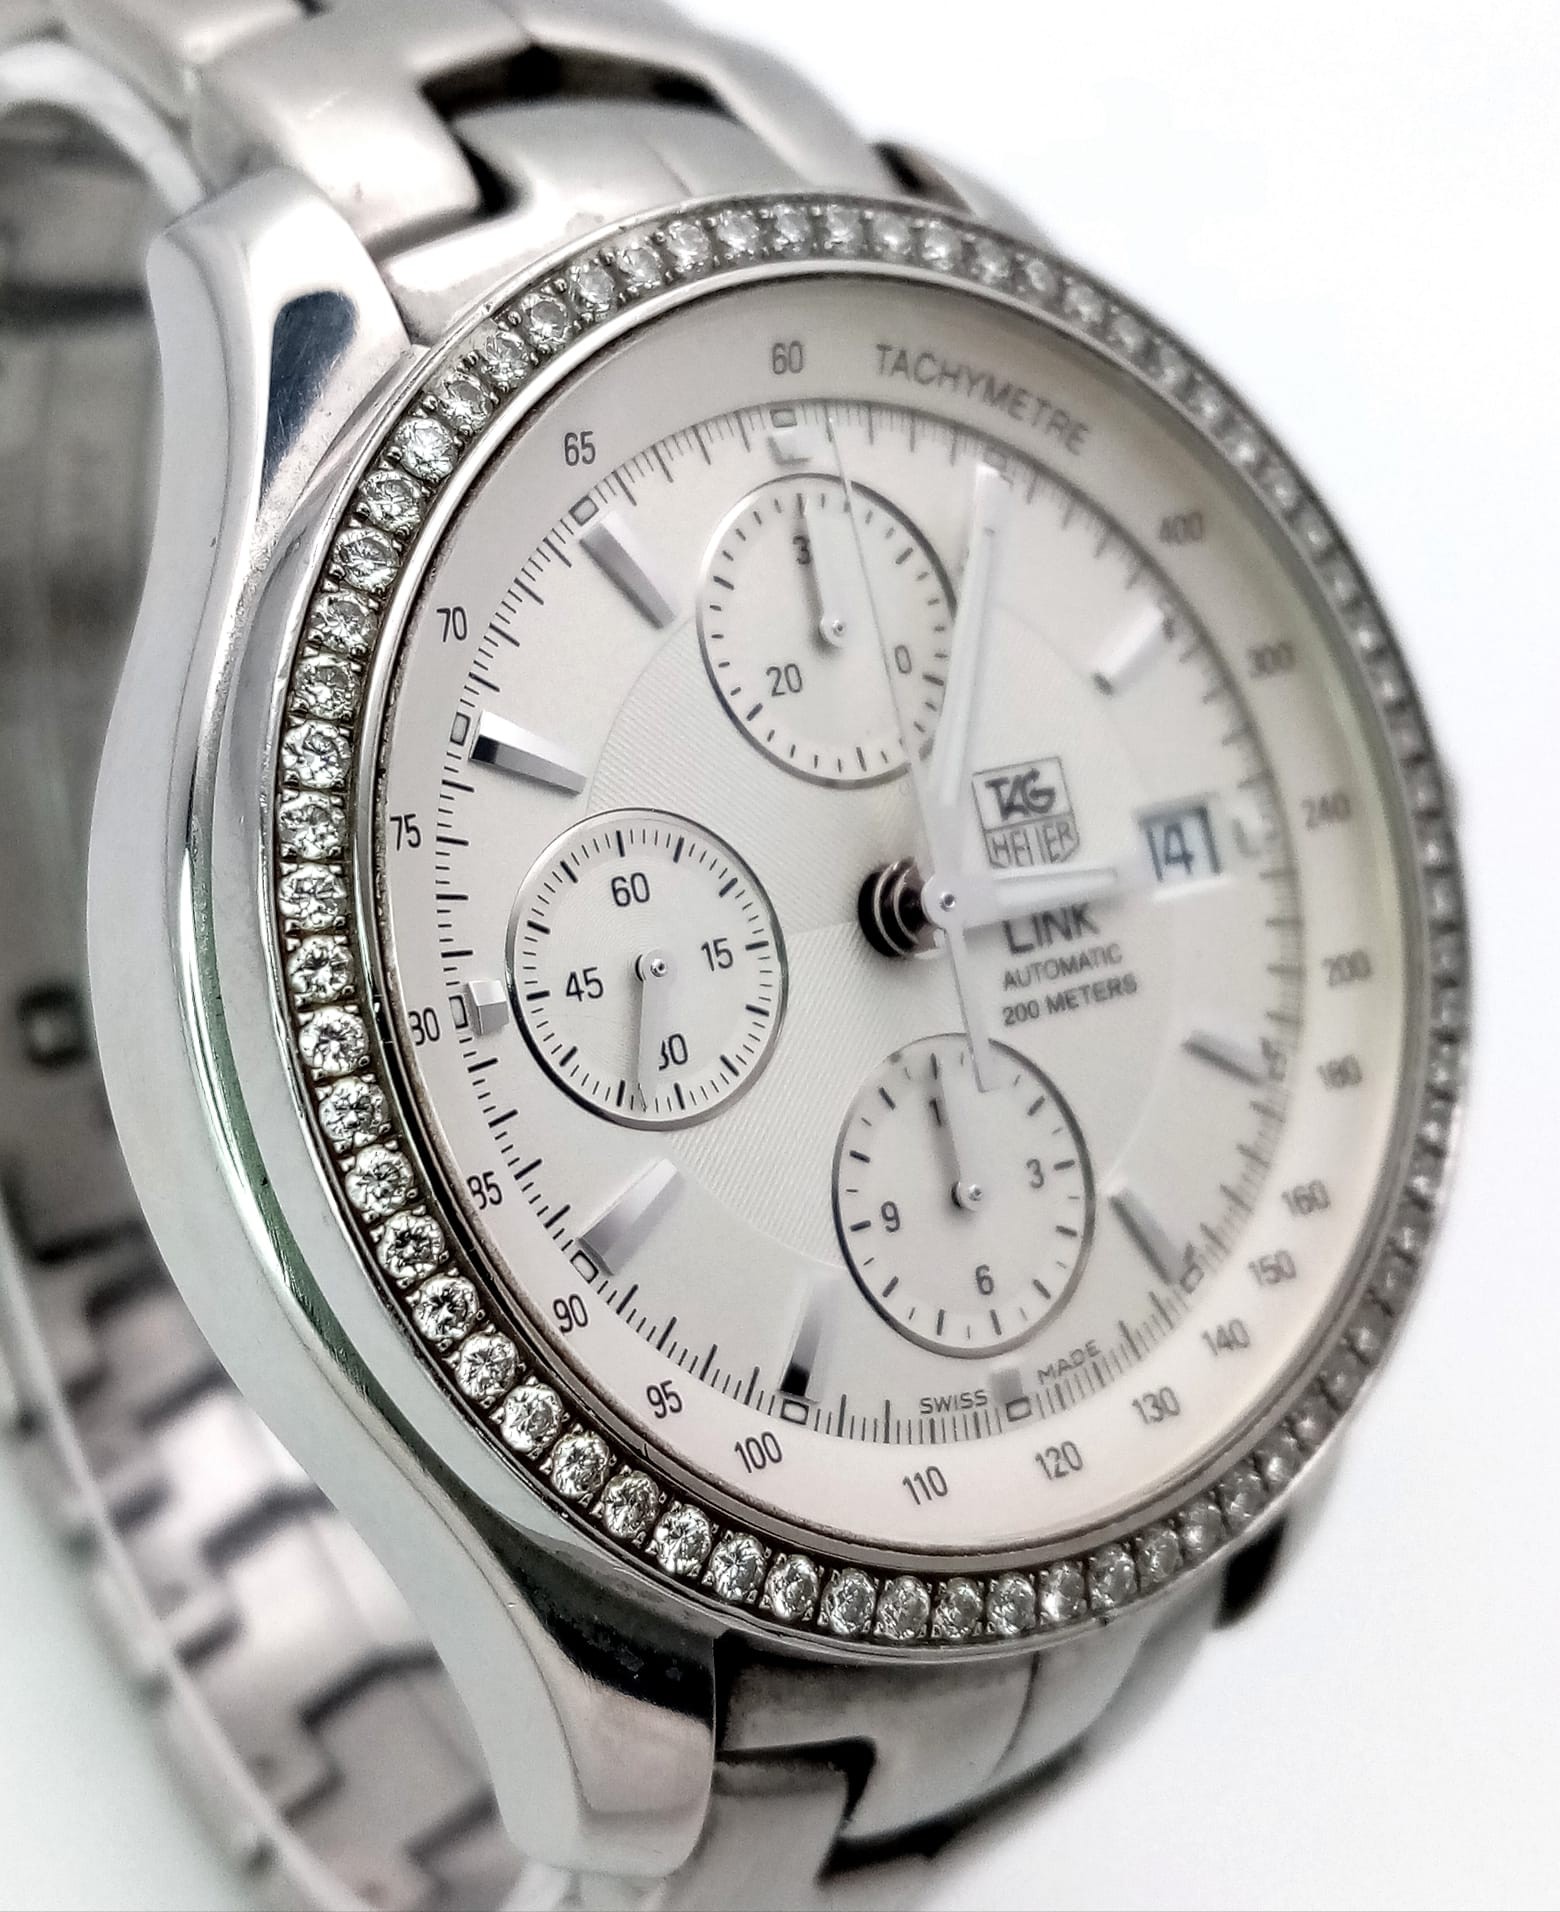 A gents TAG HEUER - LINK automatic watch with diamond set bezel. Stainless steel construction, 42 mm - Image 8 of 12